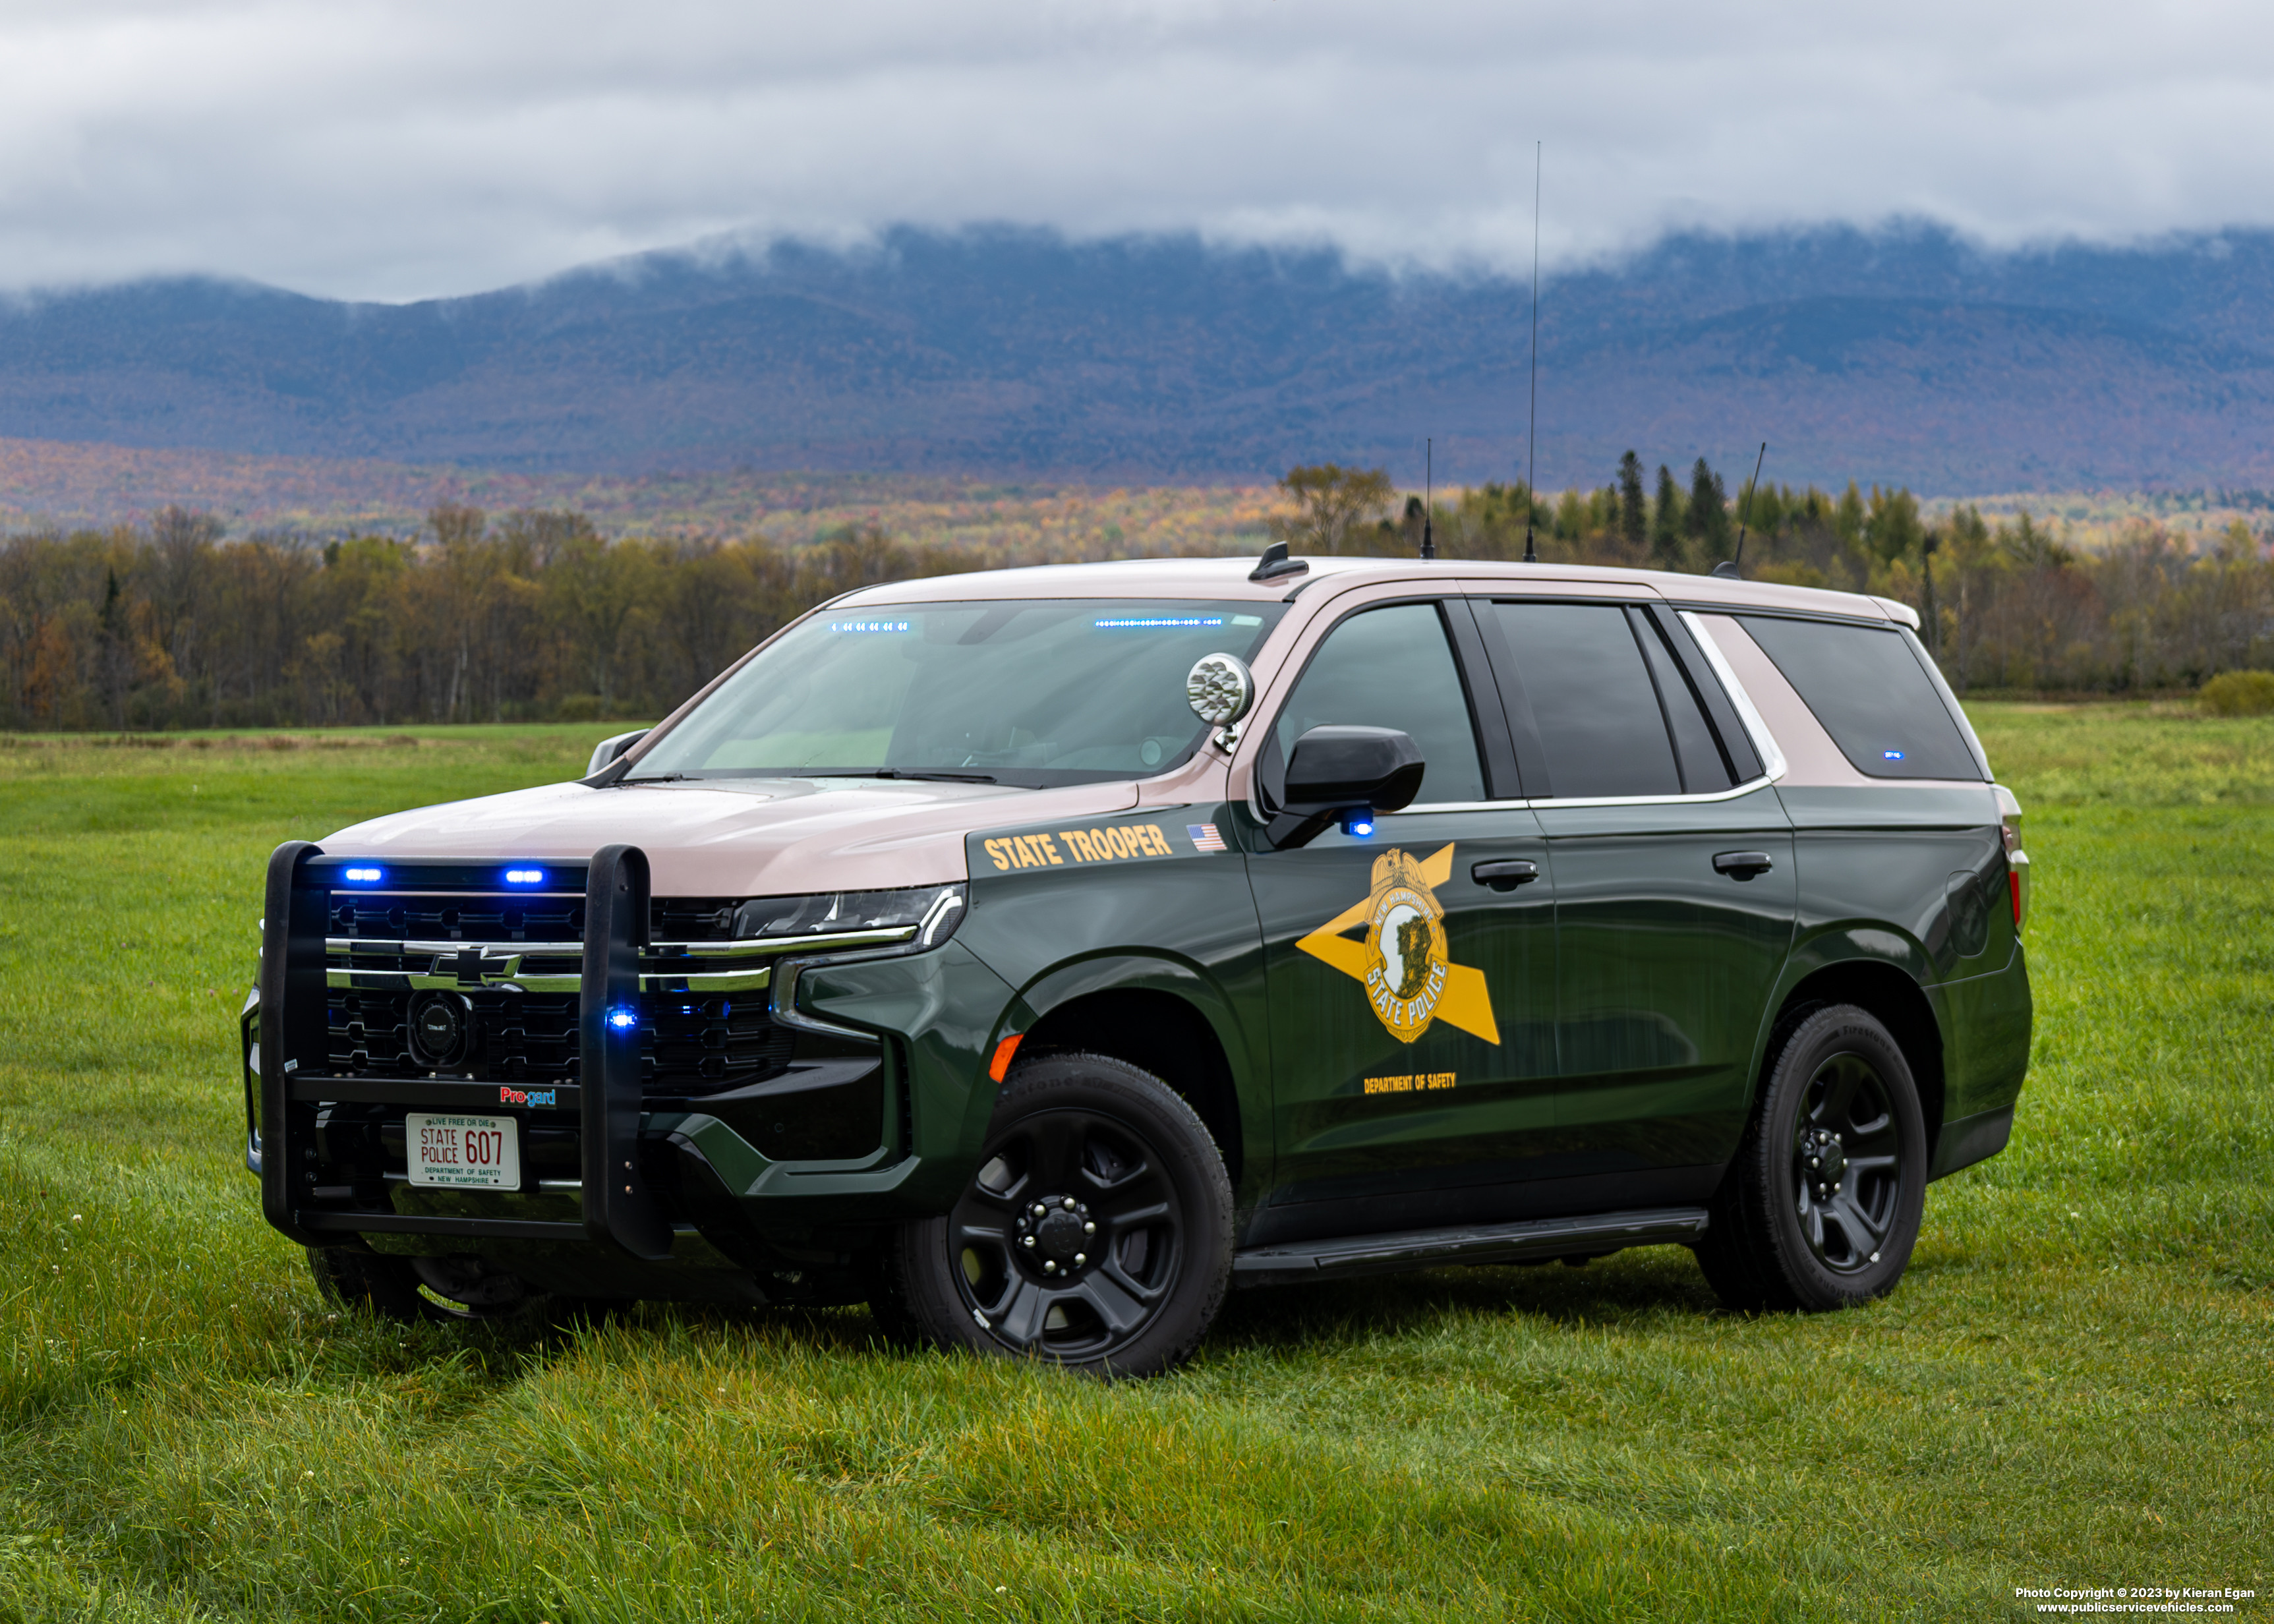 A photo  of New Hampshire State Police
            Cruiser 607, a 2022 Chevrolet Tahoe             taken by Kieran Egan